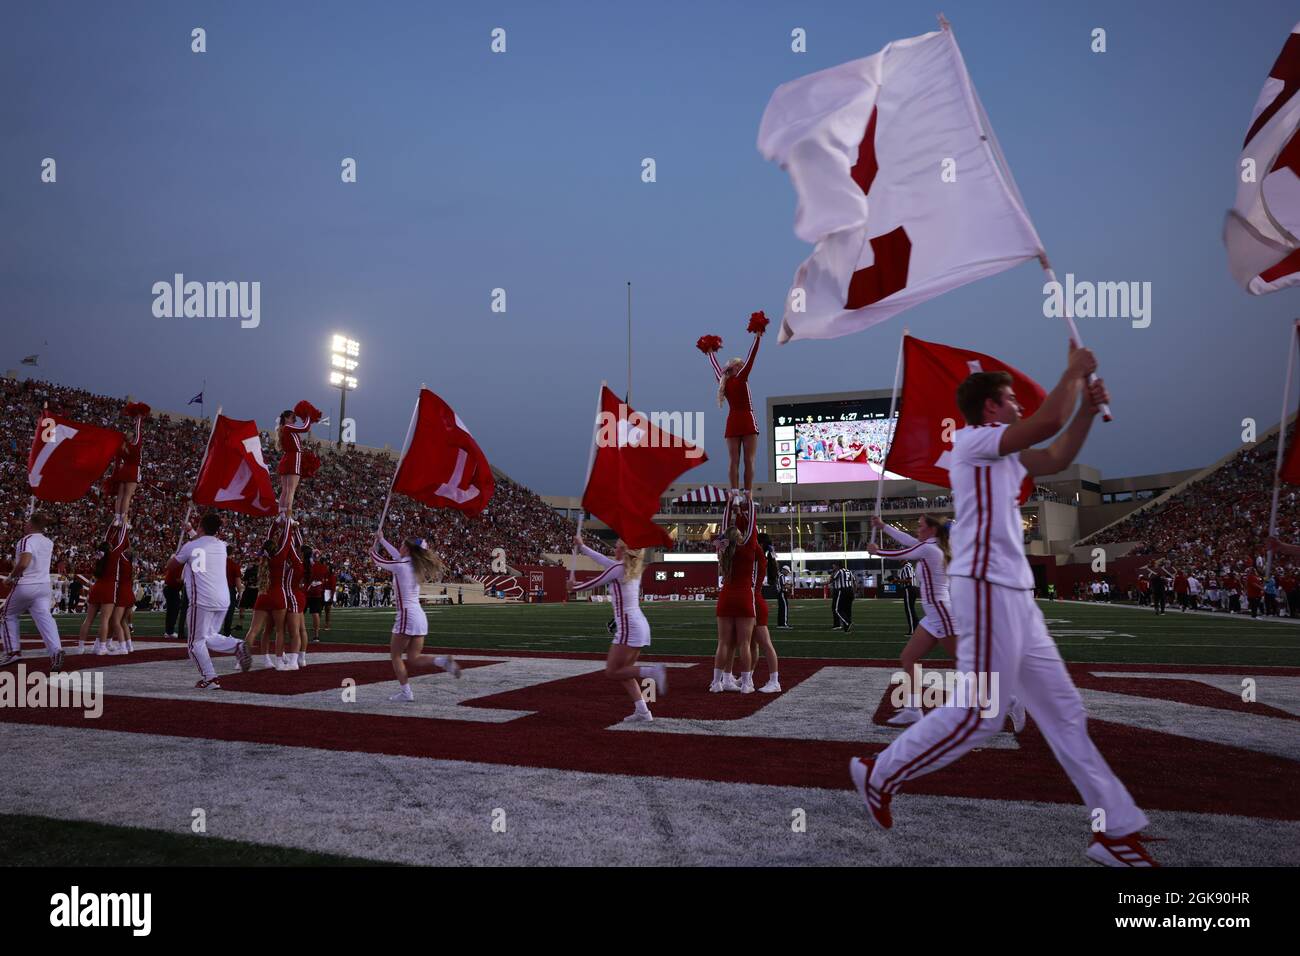 Indiana University cheerleaders carry flags after IU scores against Idaho during the NCAA football game at Memorial Stadium in Bloomington.The Hoosiers beat the Vandals 56-14. Stock Photo